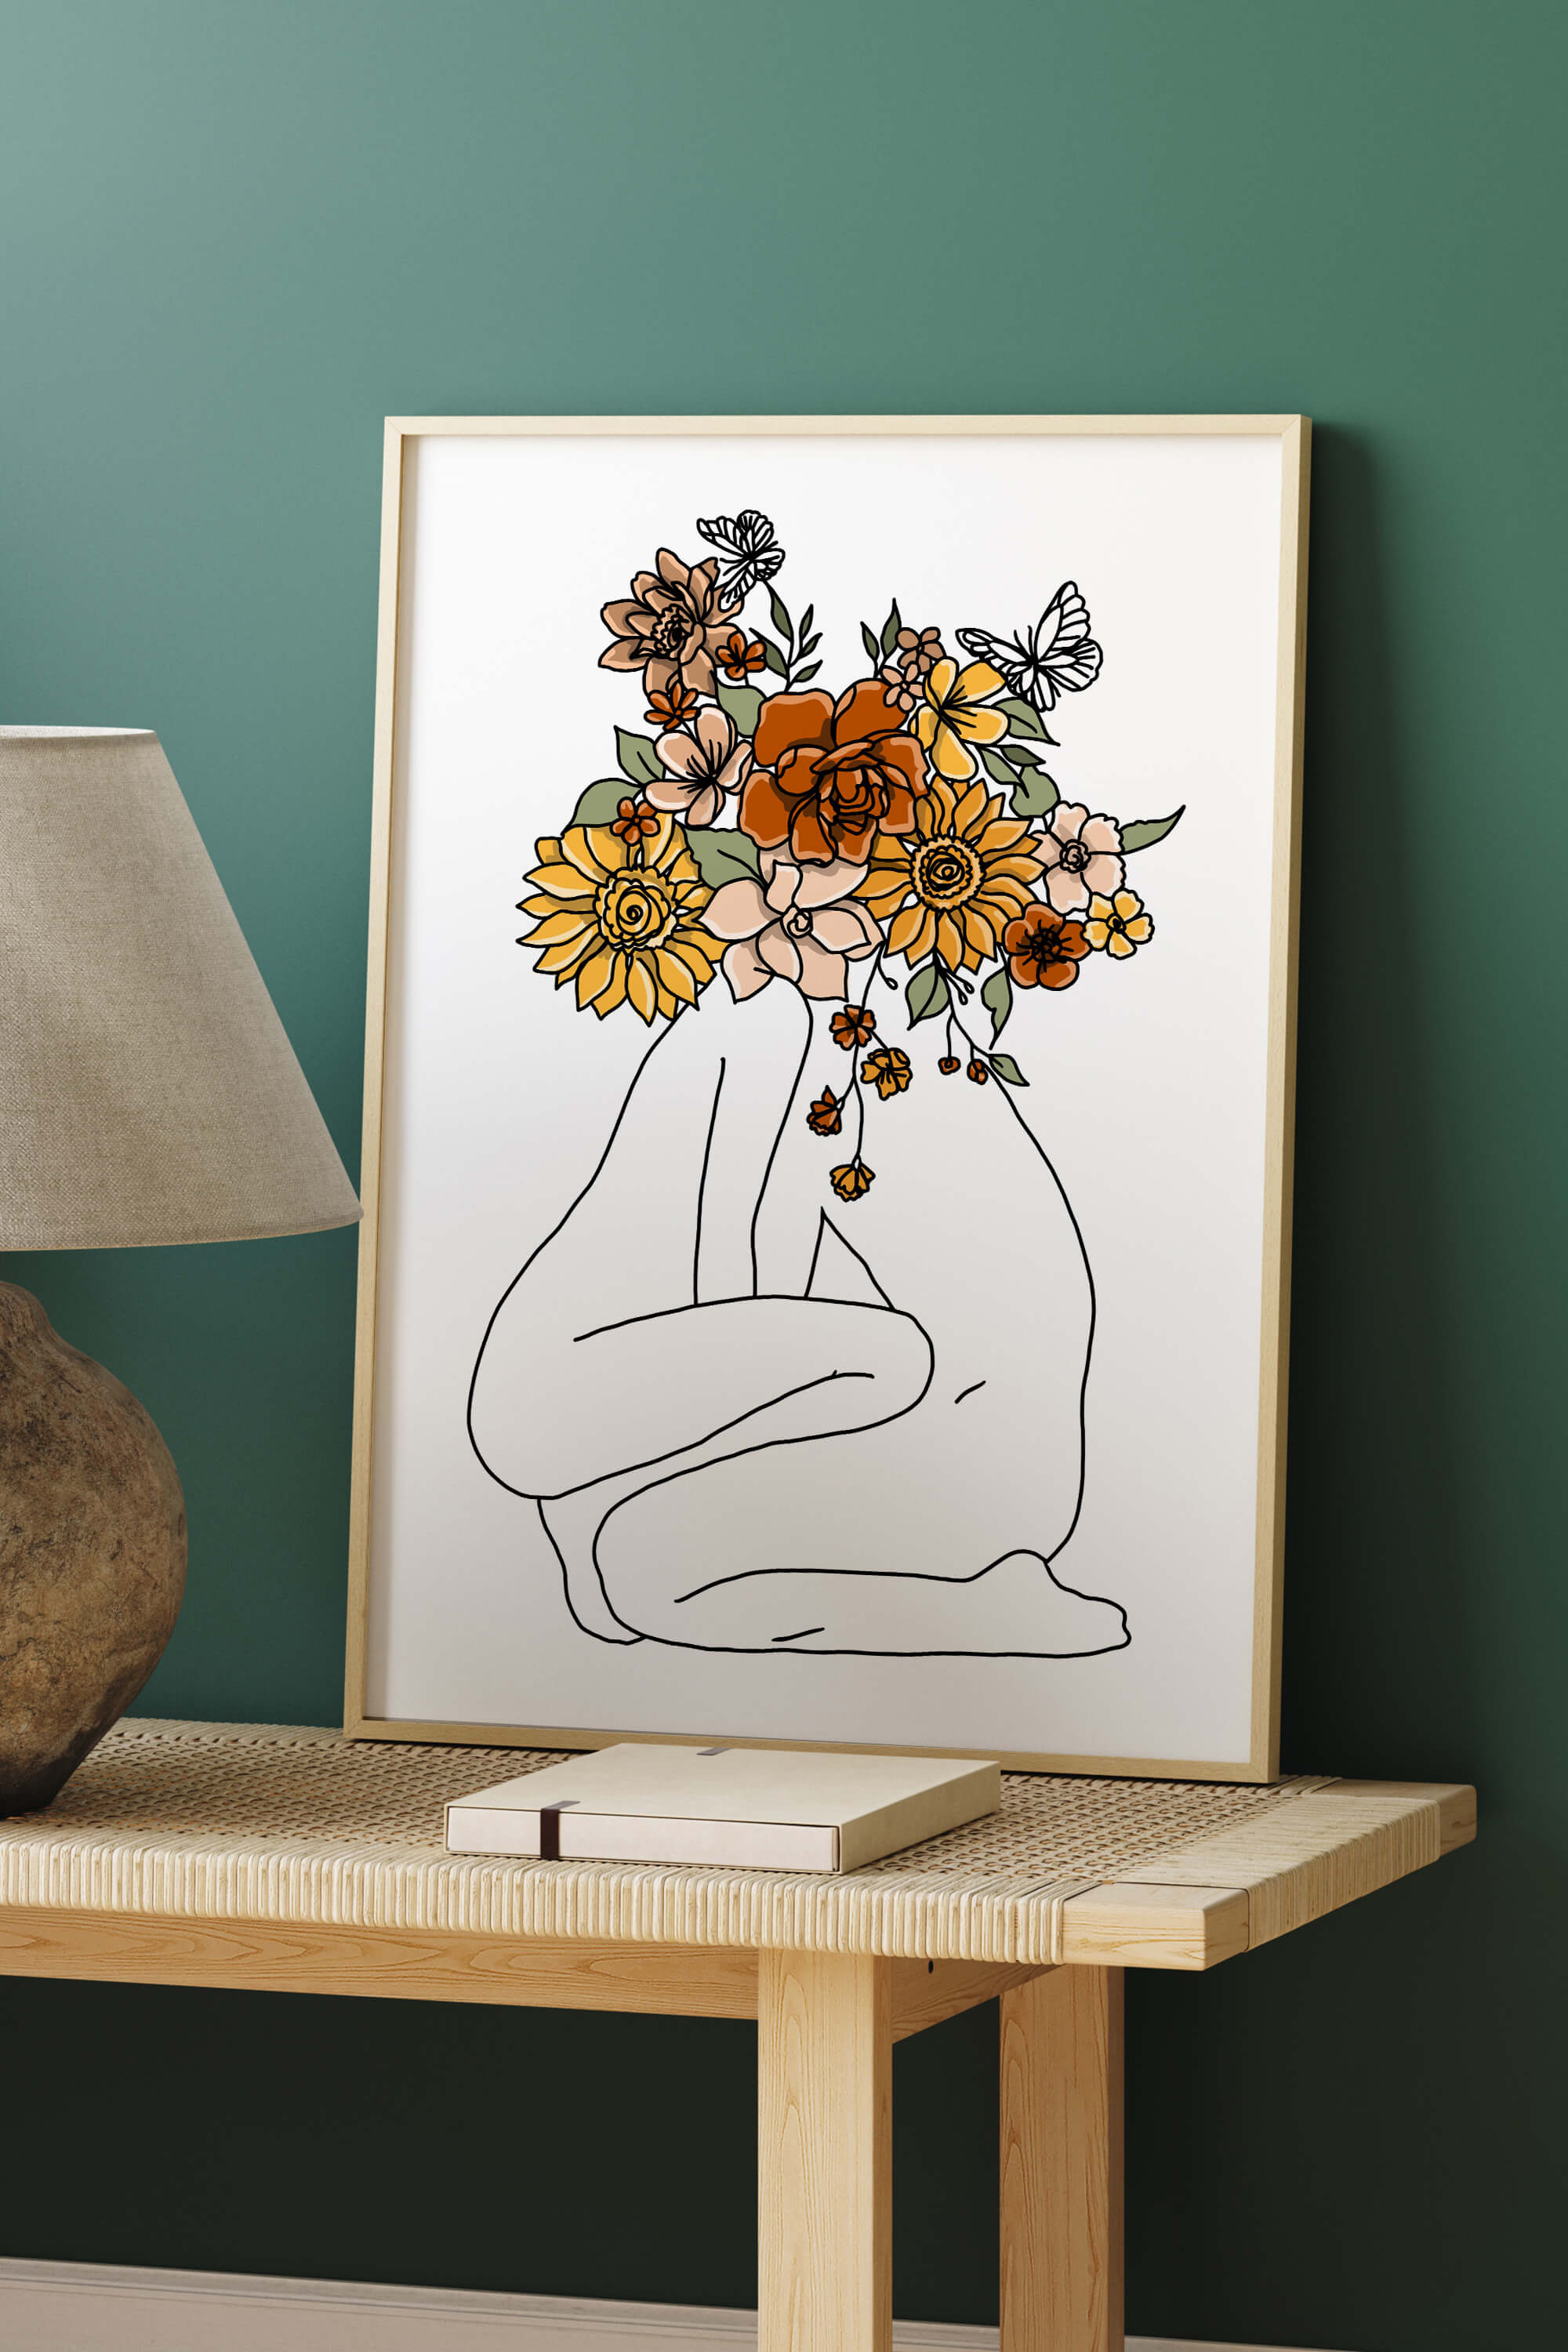 Experience sensory bliss with this adorable couple's body line art, a visual treat that creates a haven of peace and charm. Immerse yourself in the gentle lines, turning your walls into a personal oasis.